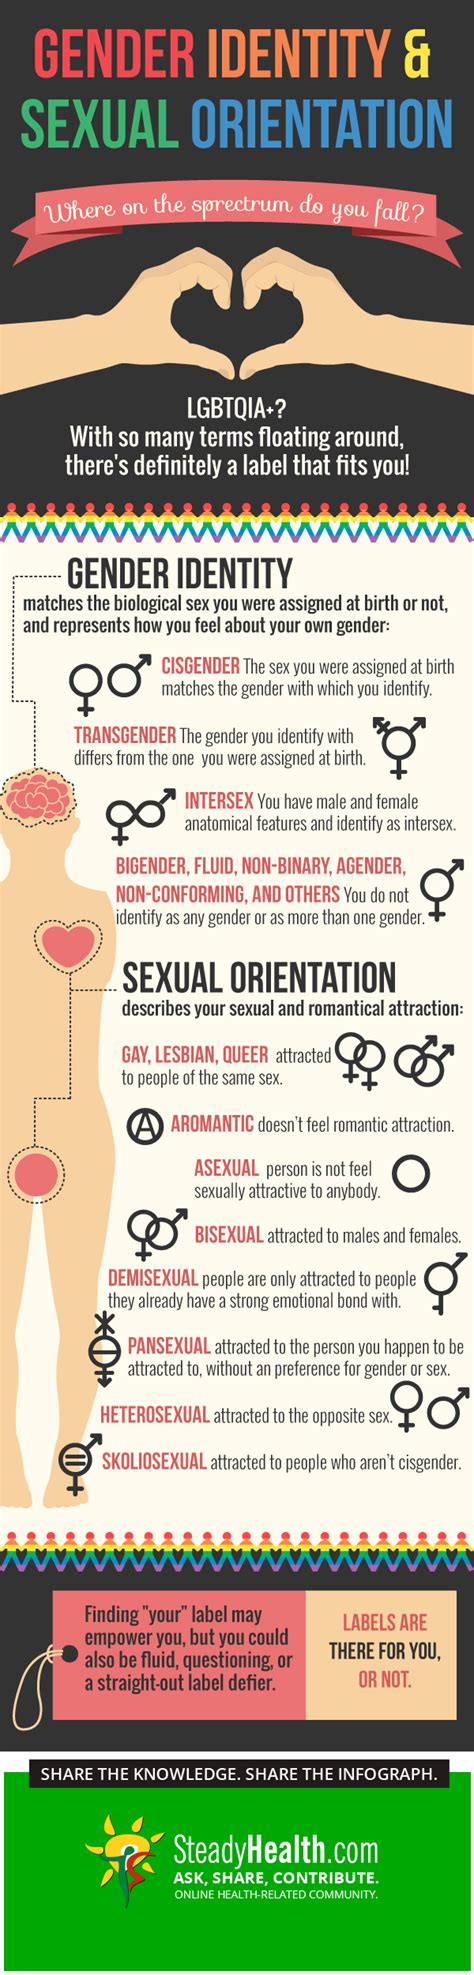 Gender Identity And Sexual Orientation Where On The Spectrum Do You